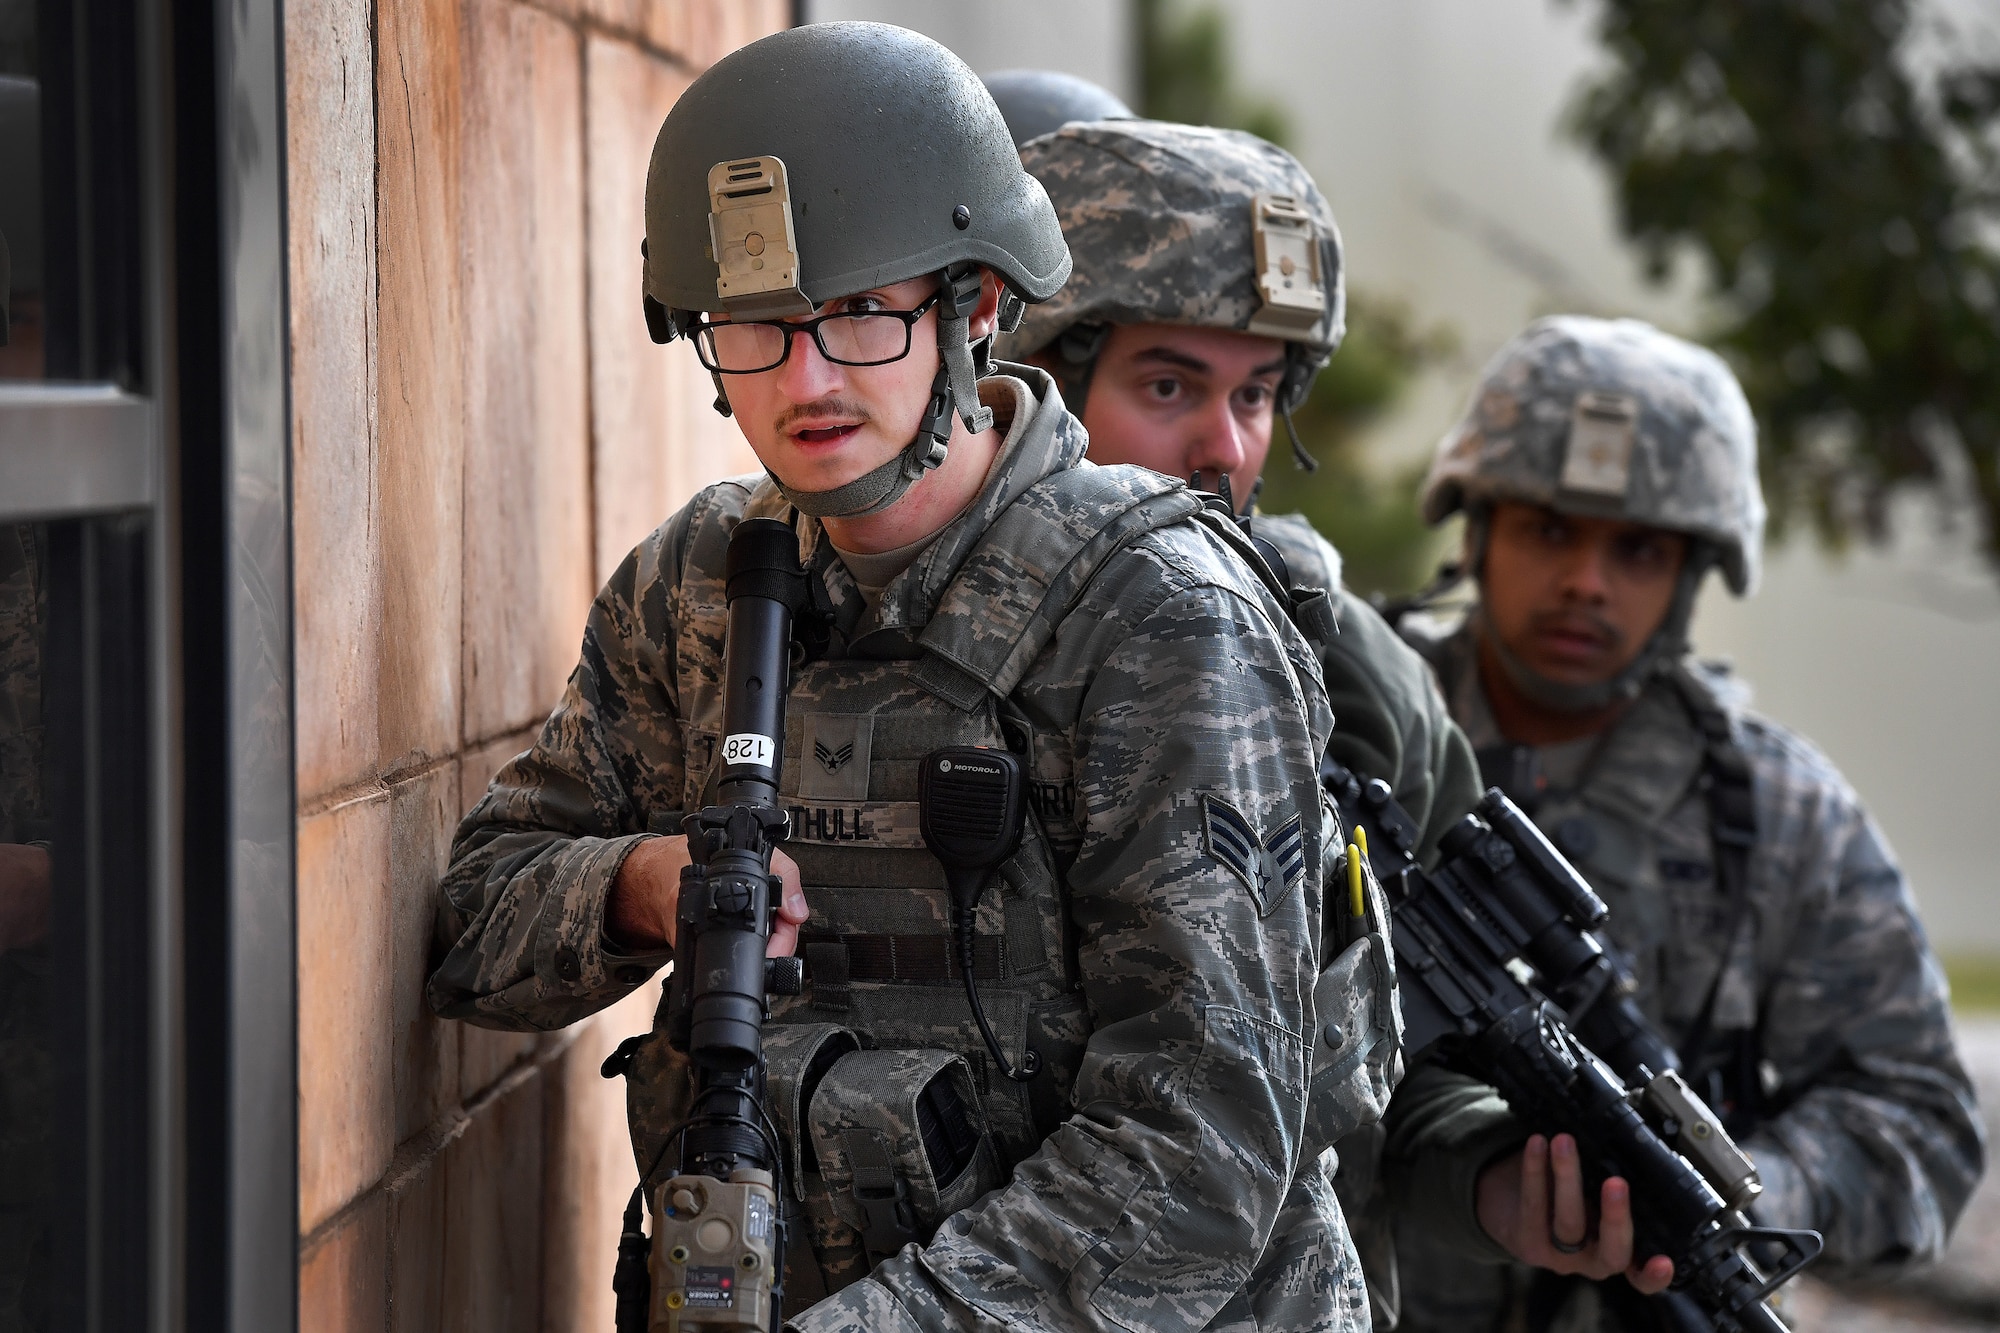 50th Security Forces Squadron patrolmen prepare to enter and clear the fitness center during Opinicus Vista 18-2 at Schriever Air Force Base, Colorado, Oct. 17, 2018. The exercise was held to test and evaluate the readiness and emergency response capabilities of the installation. (U.S. Air Force Photo by Dennis Rogers)